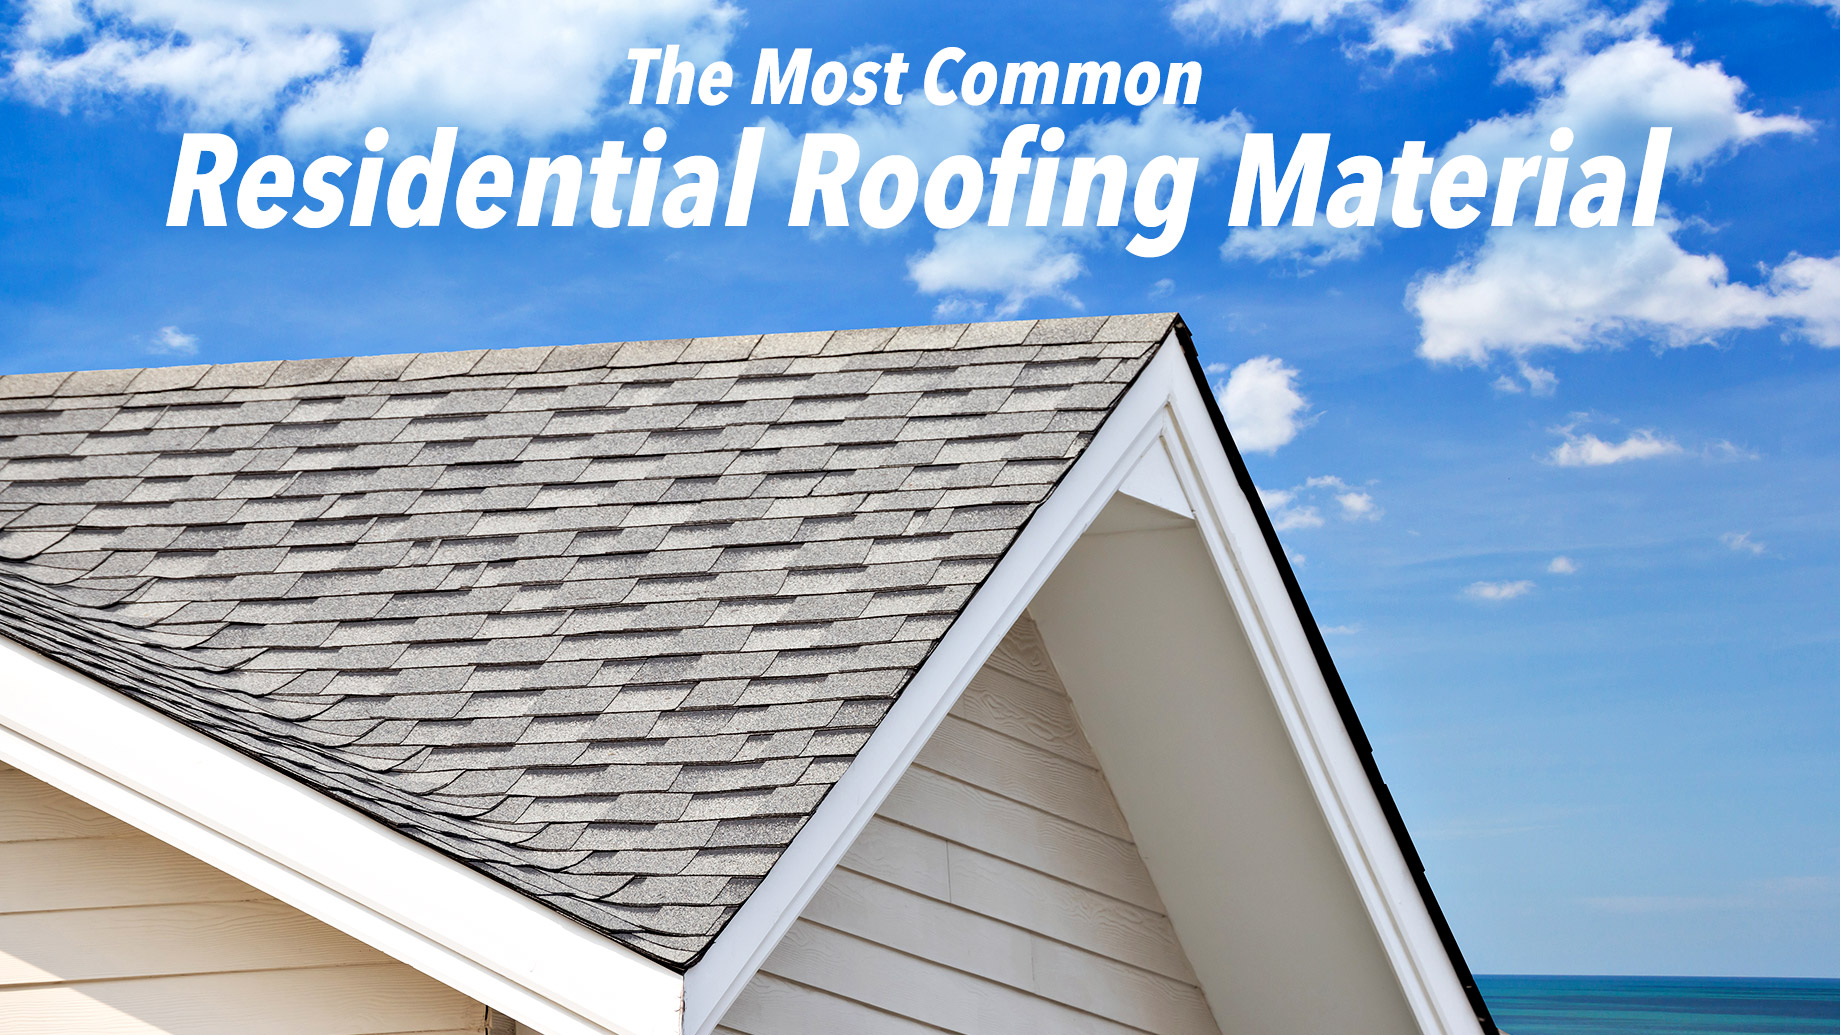 The MostThe Most Common Residential Roofing Material Common Residential Roofing Material